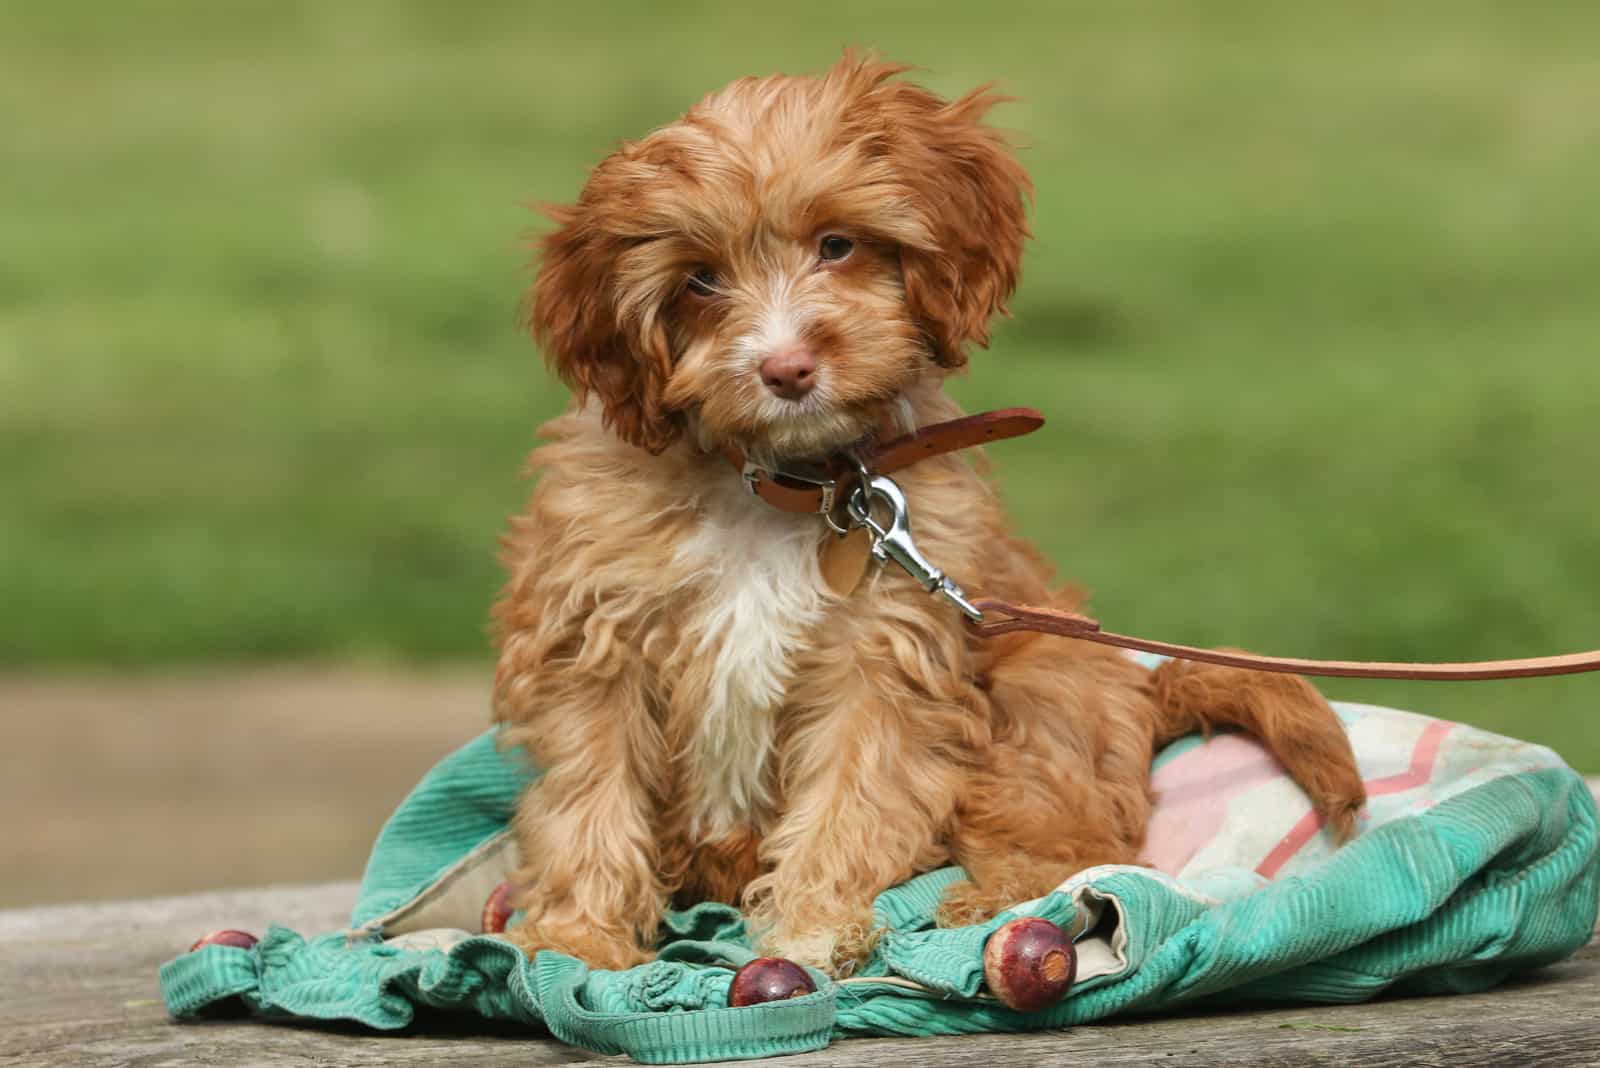 the cavapoo puppy sits on a wooden mat and looks at the camera